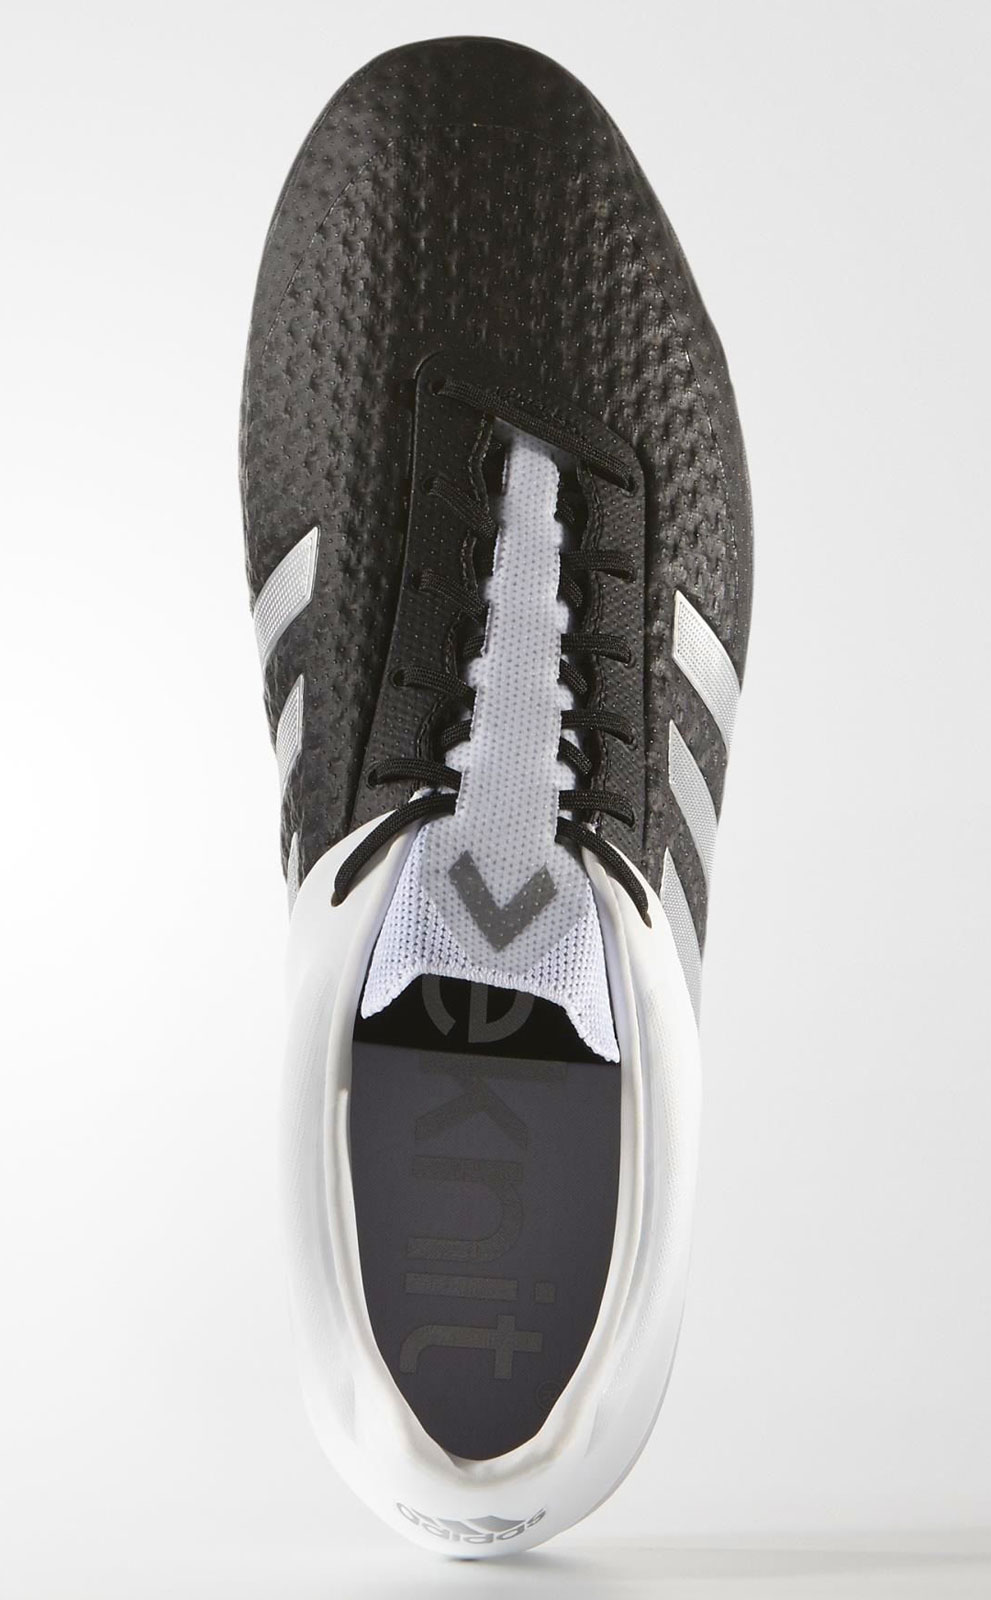 Black / White Adidas 15+ Primeknit Cage Boots Released Footy Headlines